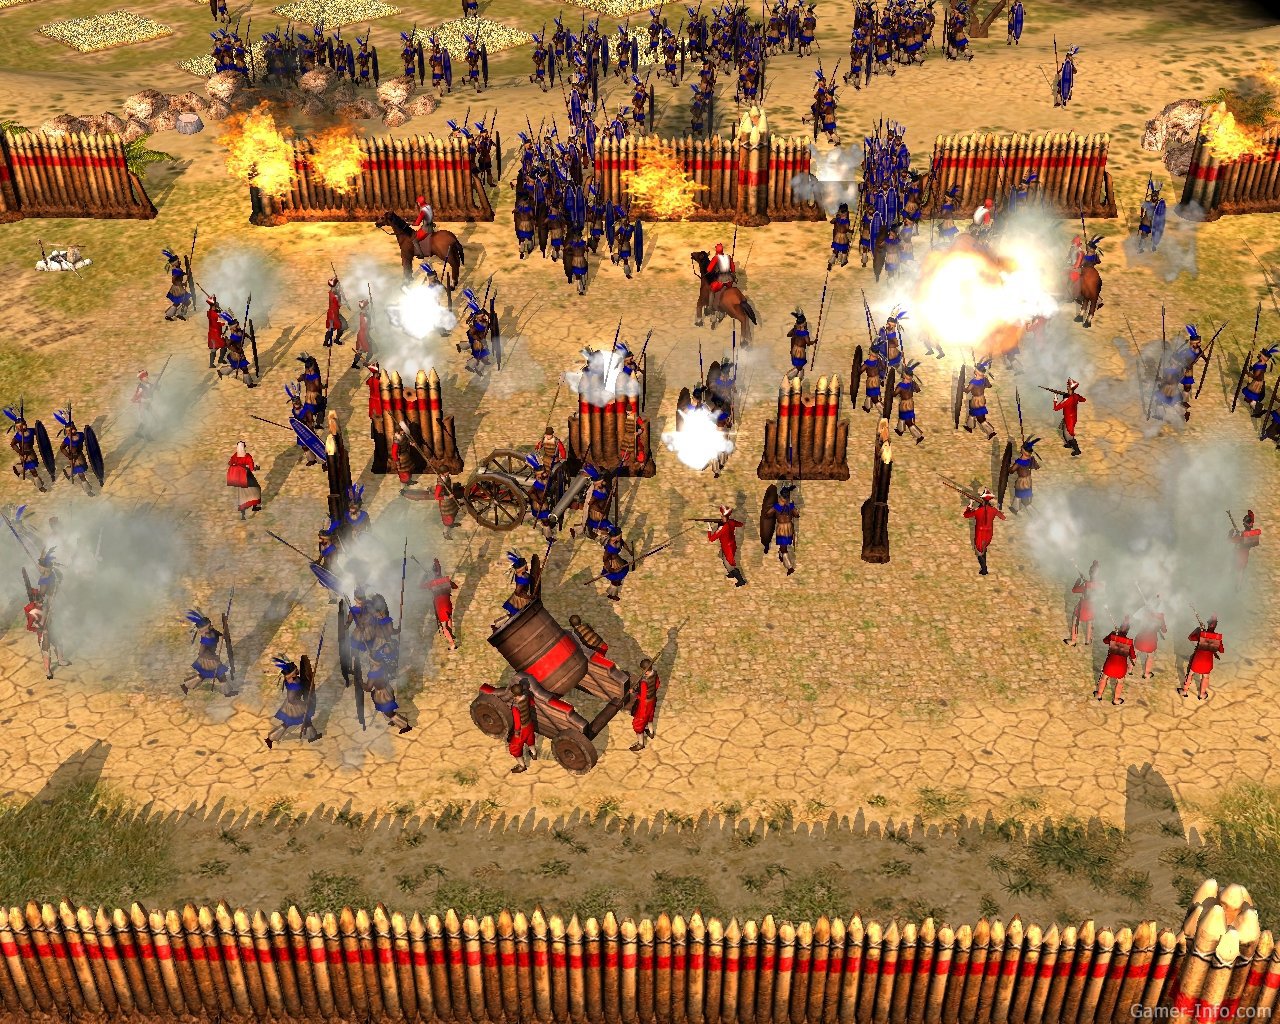 empire earth 2 art of supremacy tow